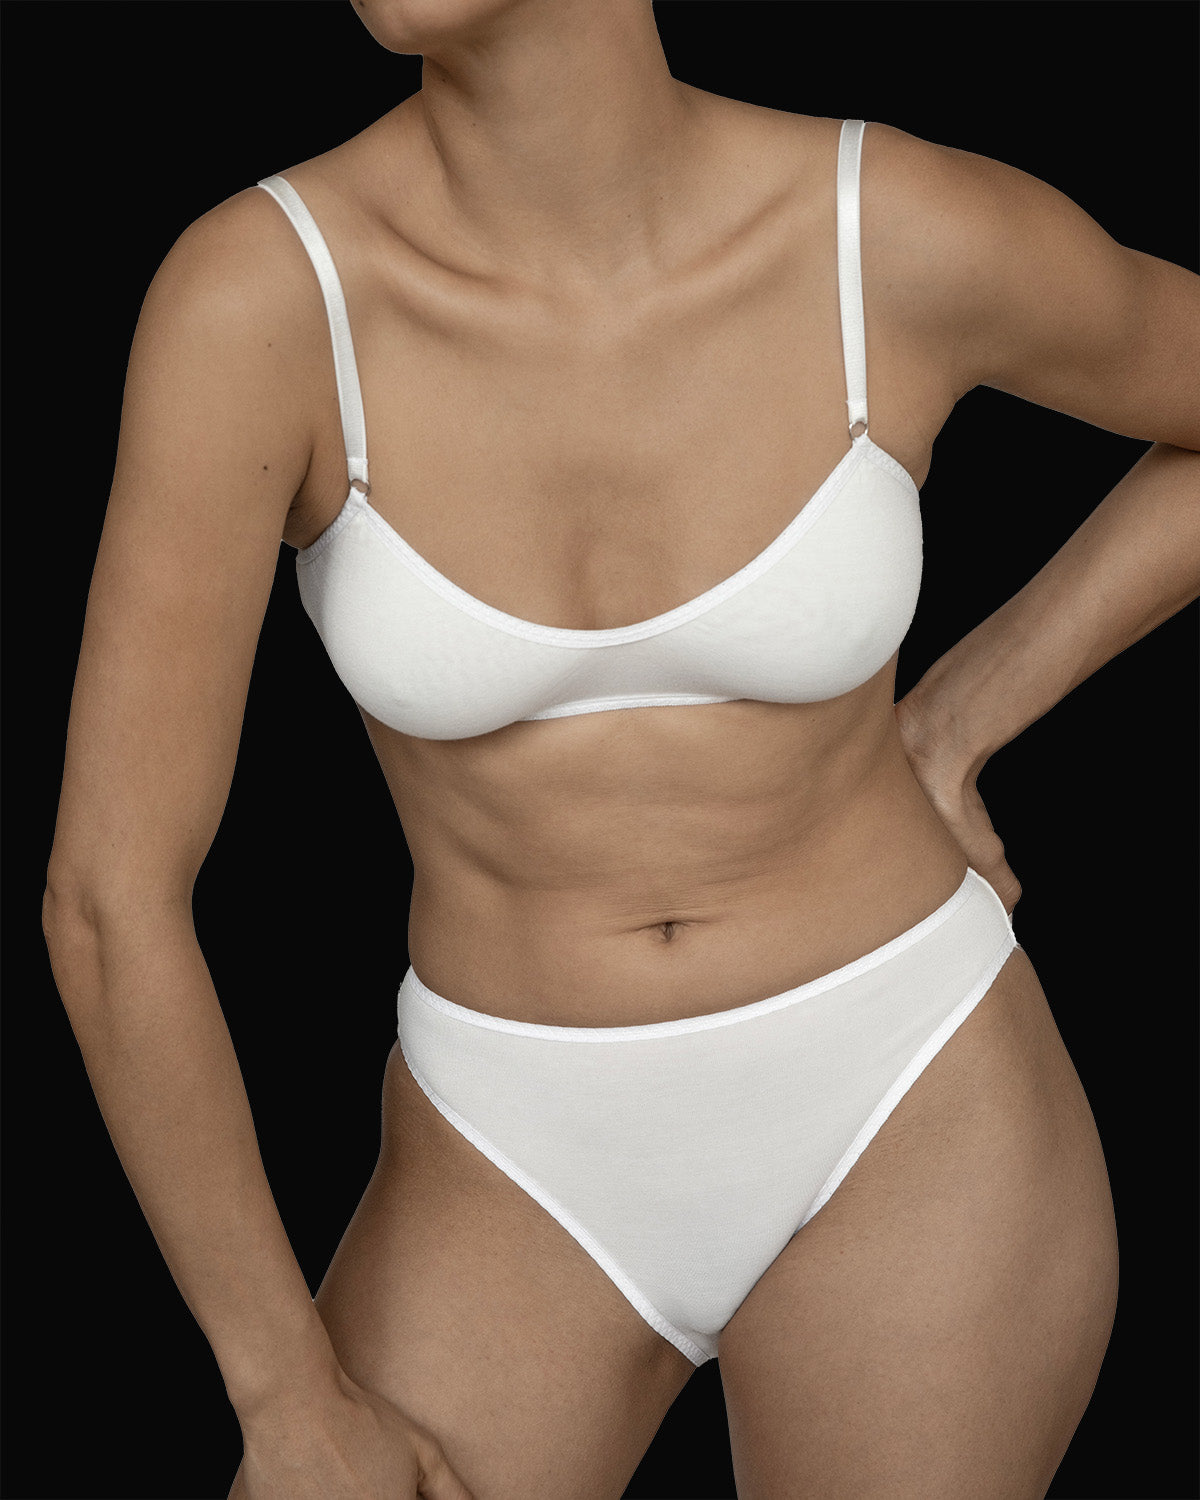 The Kye Intimates Recline Bra in the color Natural. A gentle, pullover scoop neck bra, with adjustable shoulder straps. A double layered bamboo bra that is designed to provide maximum comfort.